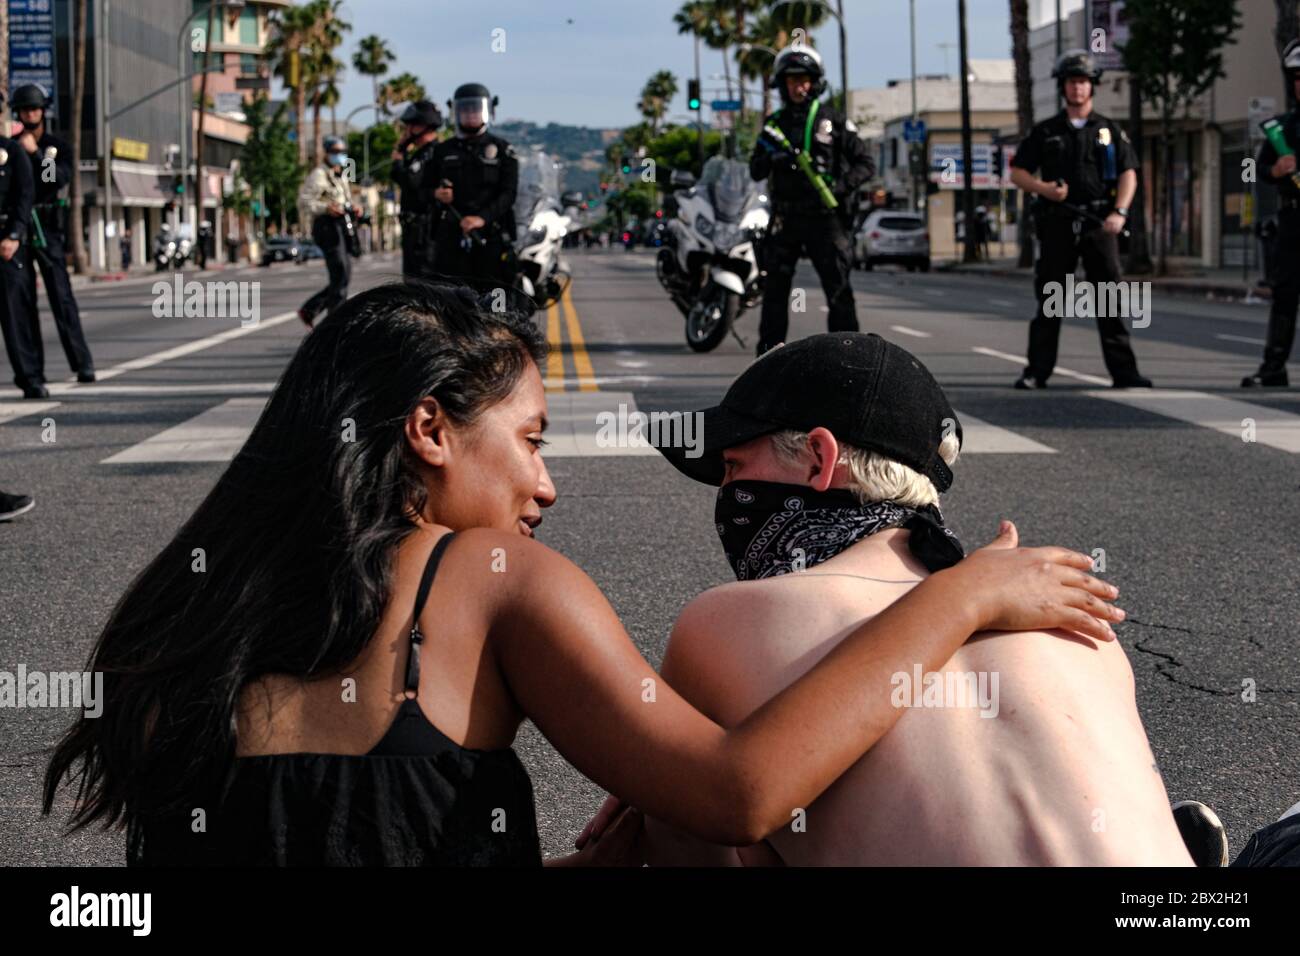 Los Angeles, California, USA. 1st June, 2020. Protestors gather in Van Nuys, during a 'Black Lives Matter' demonstration as police patrol the area. Protests erupted around the nation after George Floyd was killed in police custody in Minneapolis. Credit: Jason Ryan/ZUMA Wire/Alamy Live News Stock Photo